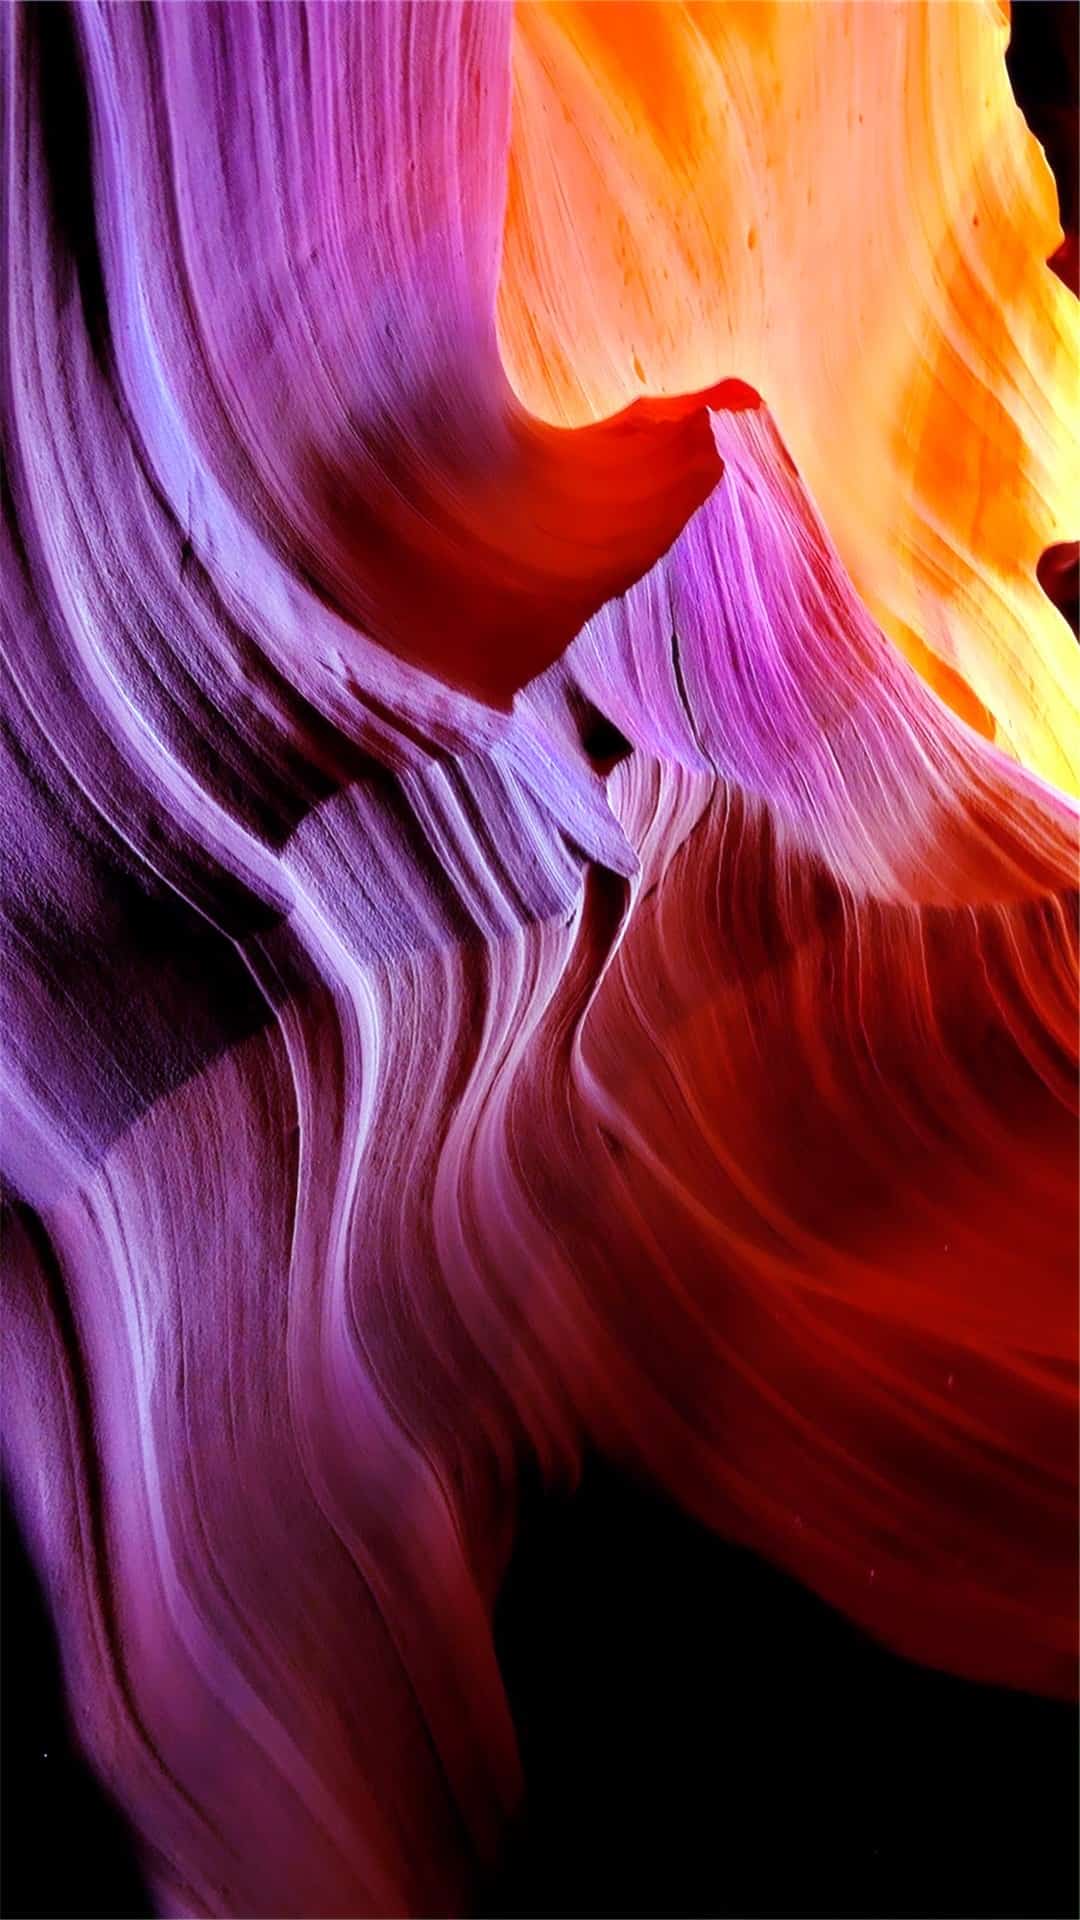 Redmi-Note-5A-Wallpapers